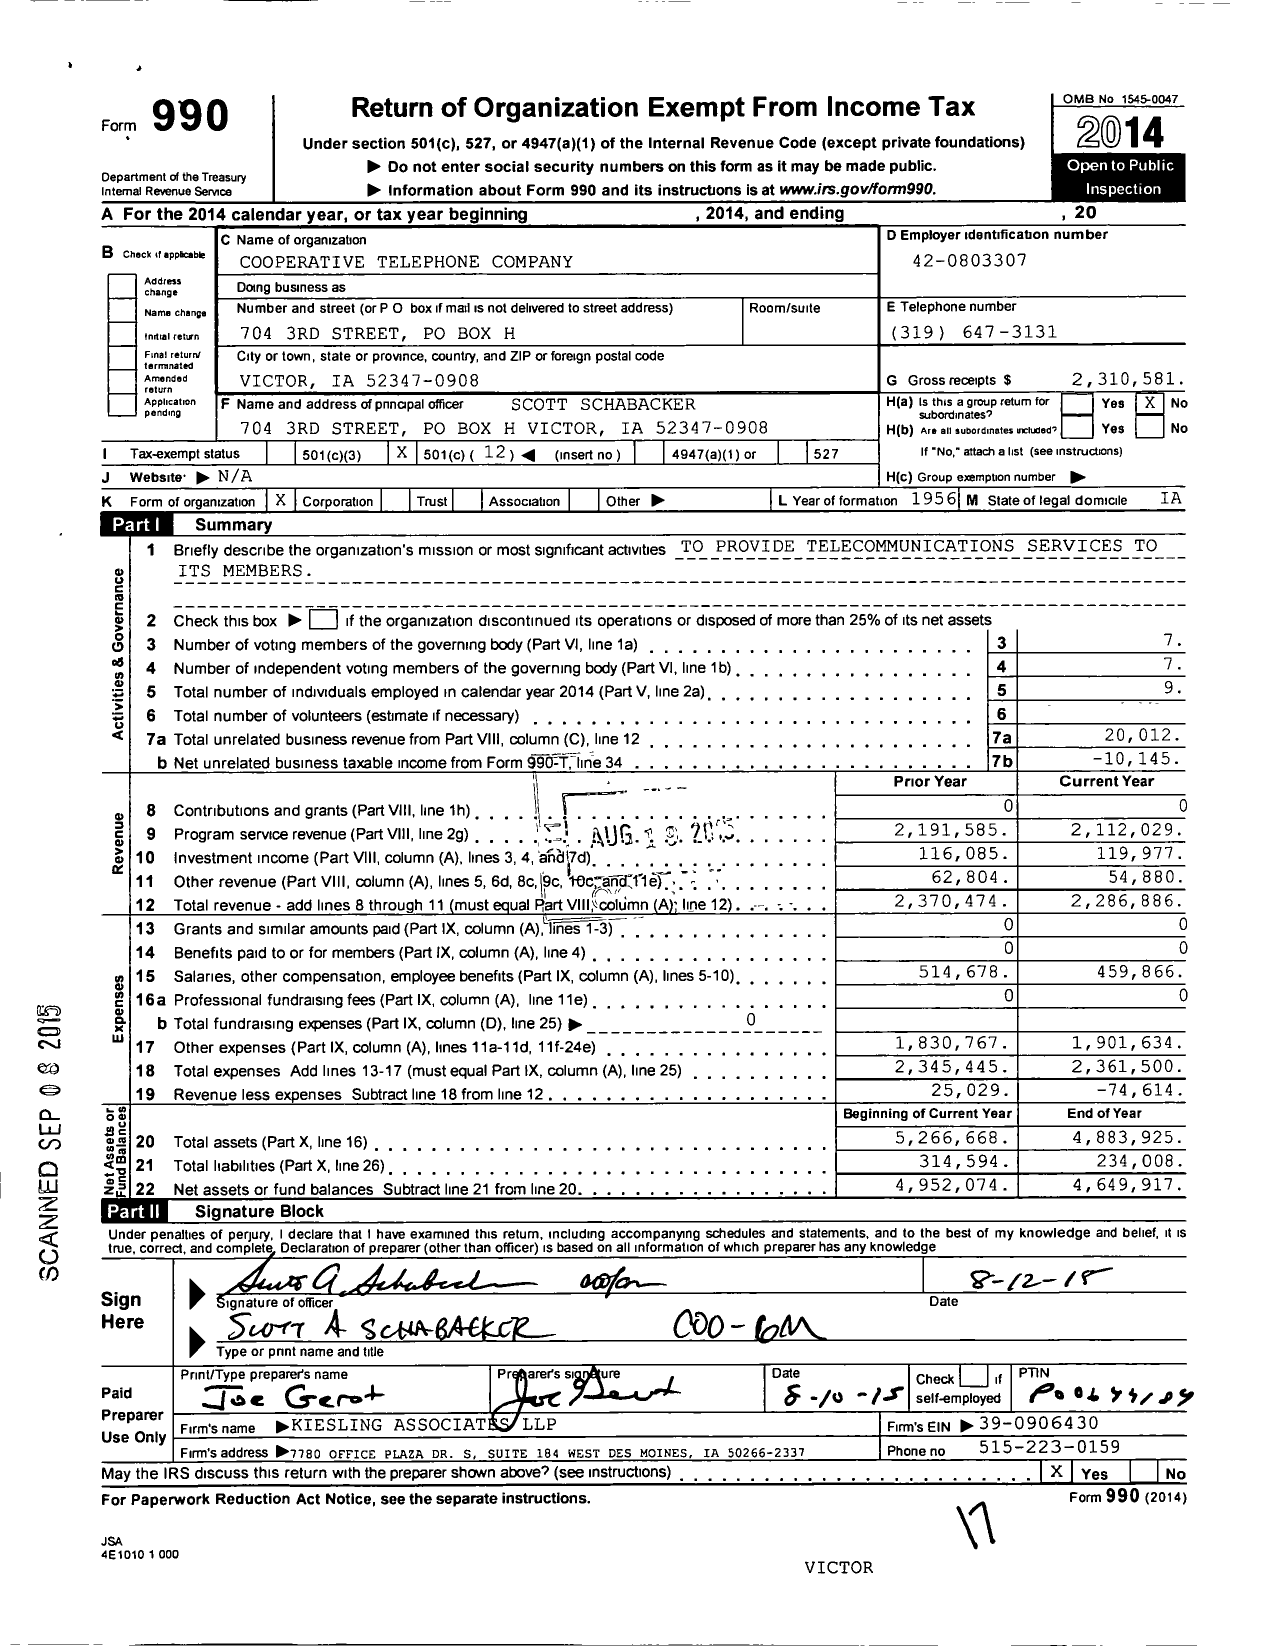 Image of first page of 2014 Form 990O for Cooperative Telephone Company